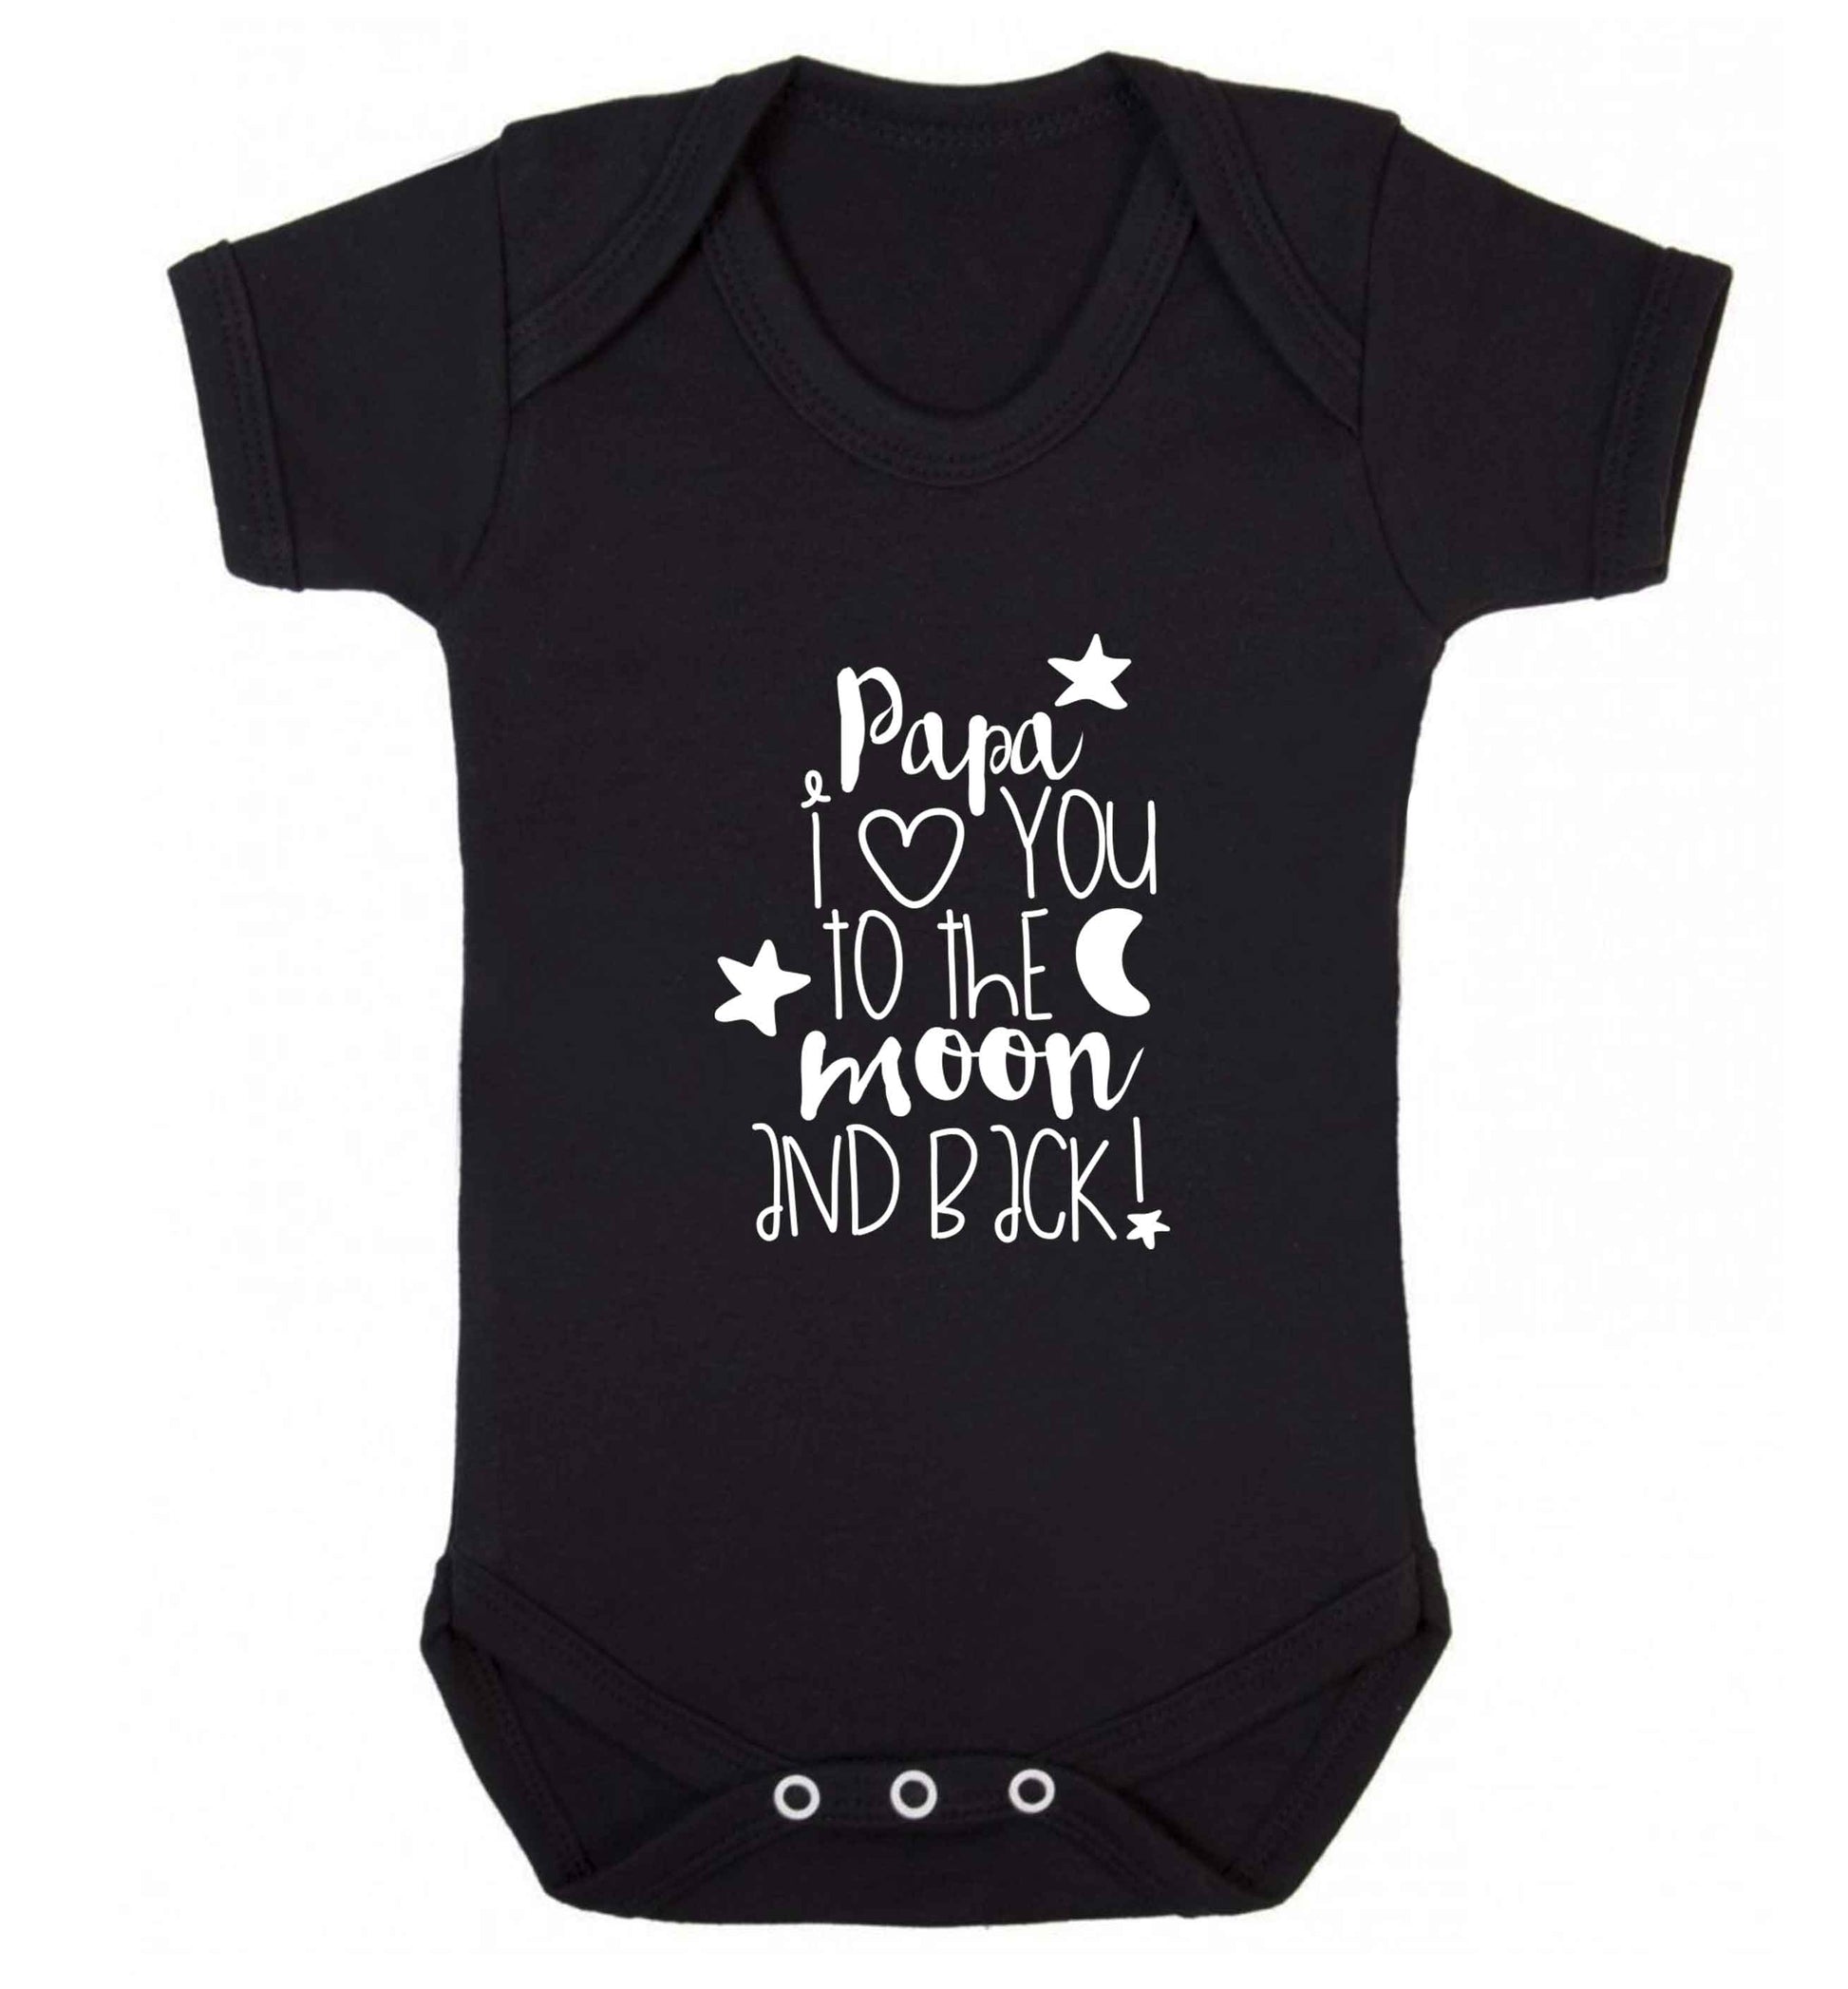 Papa I love you to the moon and back baby vest black 18-24 months